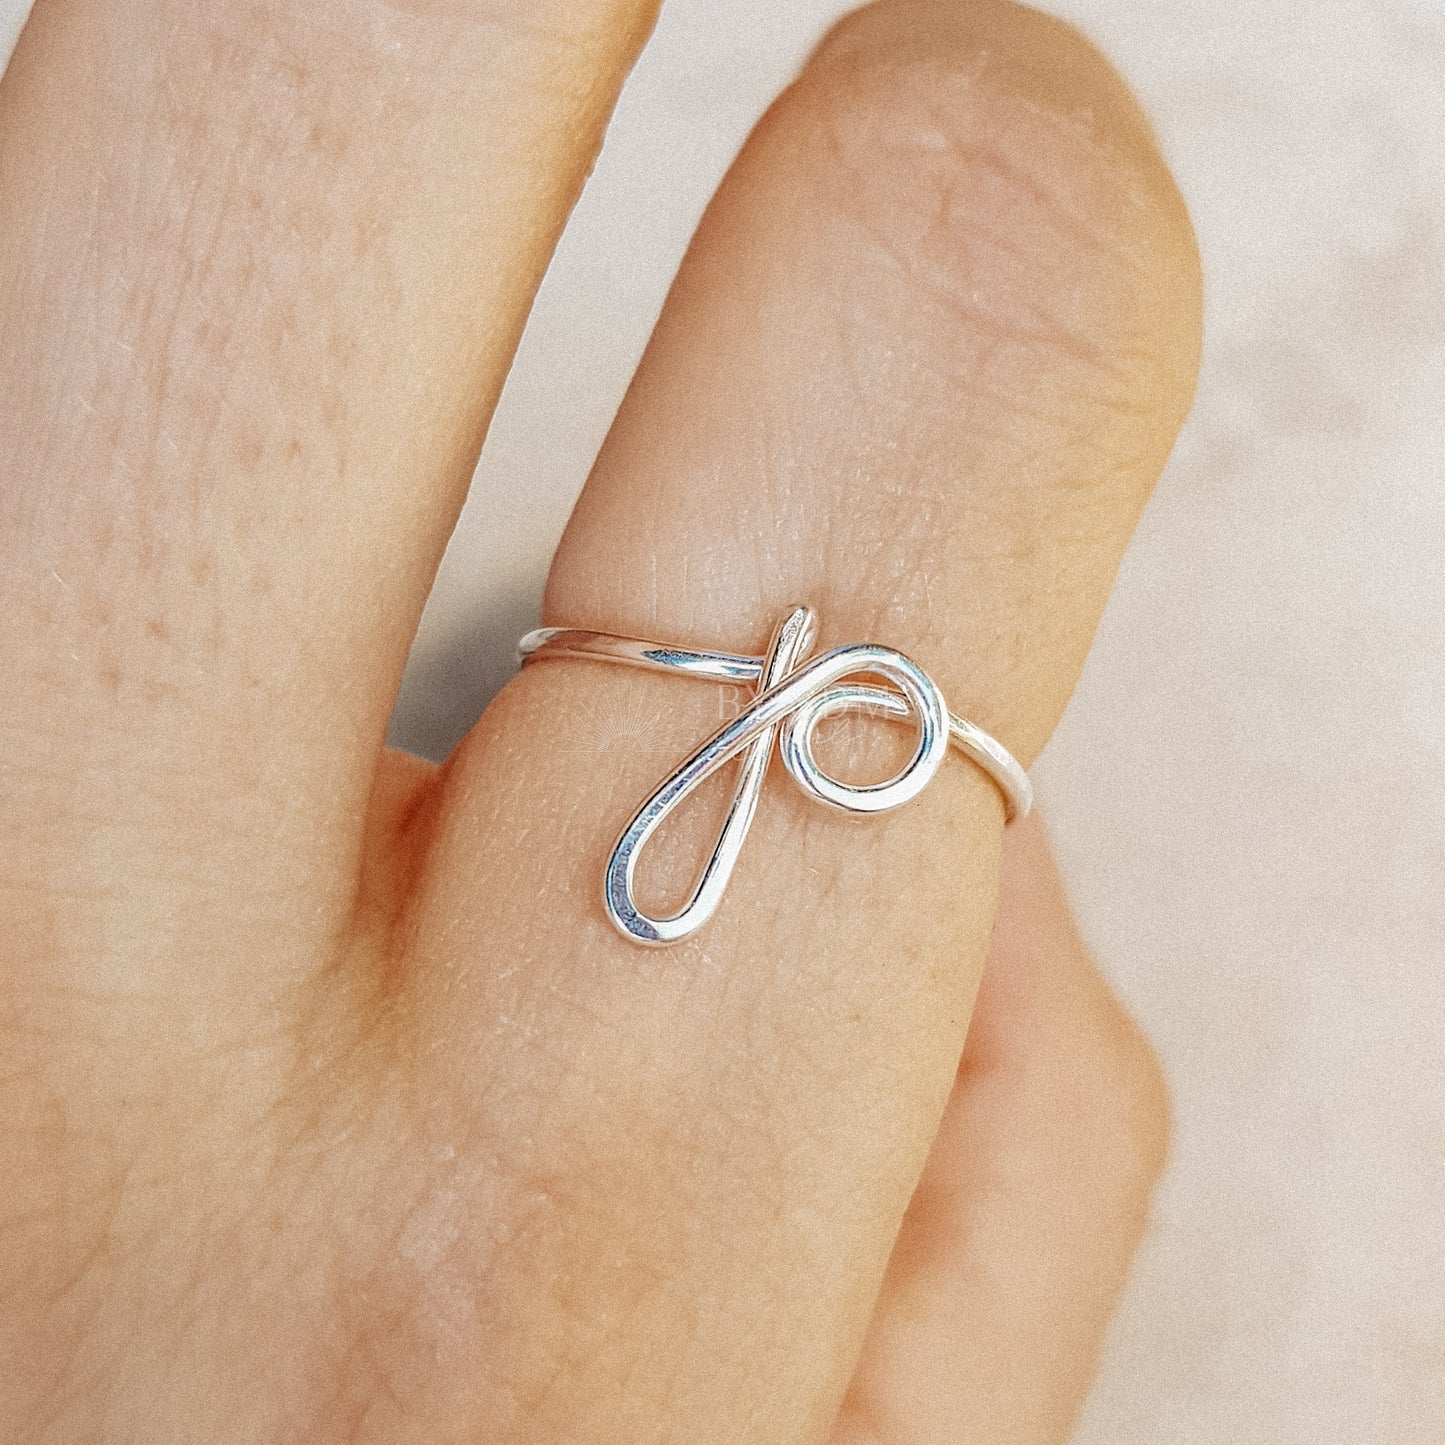 Dainty Initial P Ring • P Ring • Personalized Initial Ring • Initial Name Ring • Adjustable Initial Ring • Bridesmaid Gift • BYSDMJEWELS